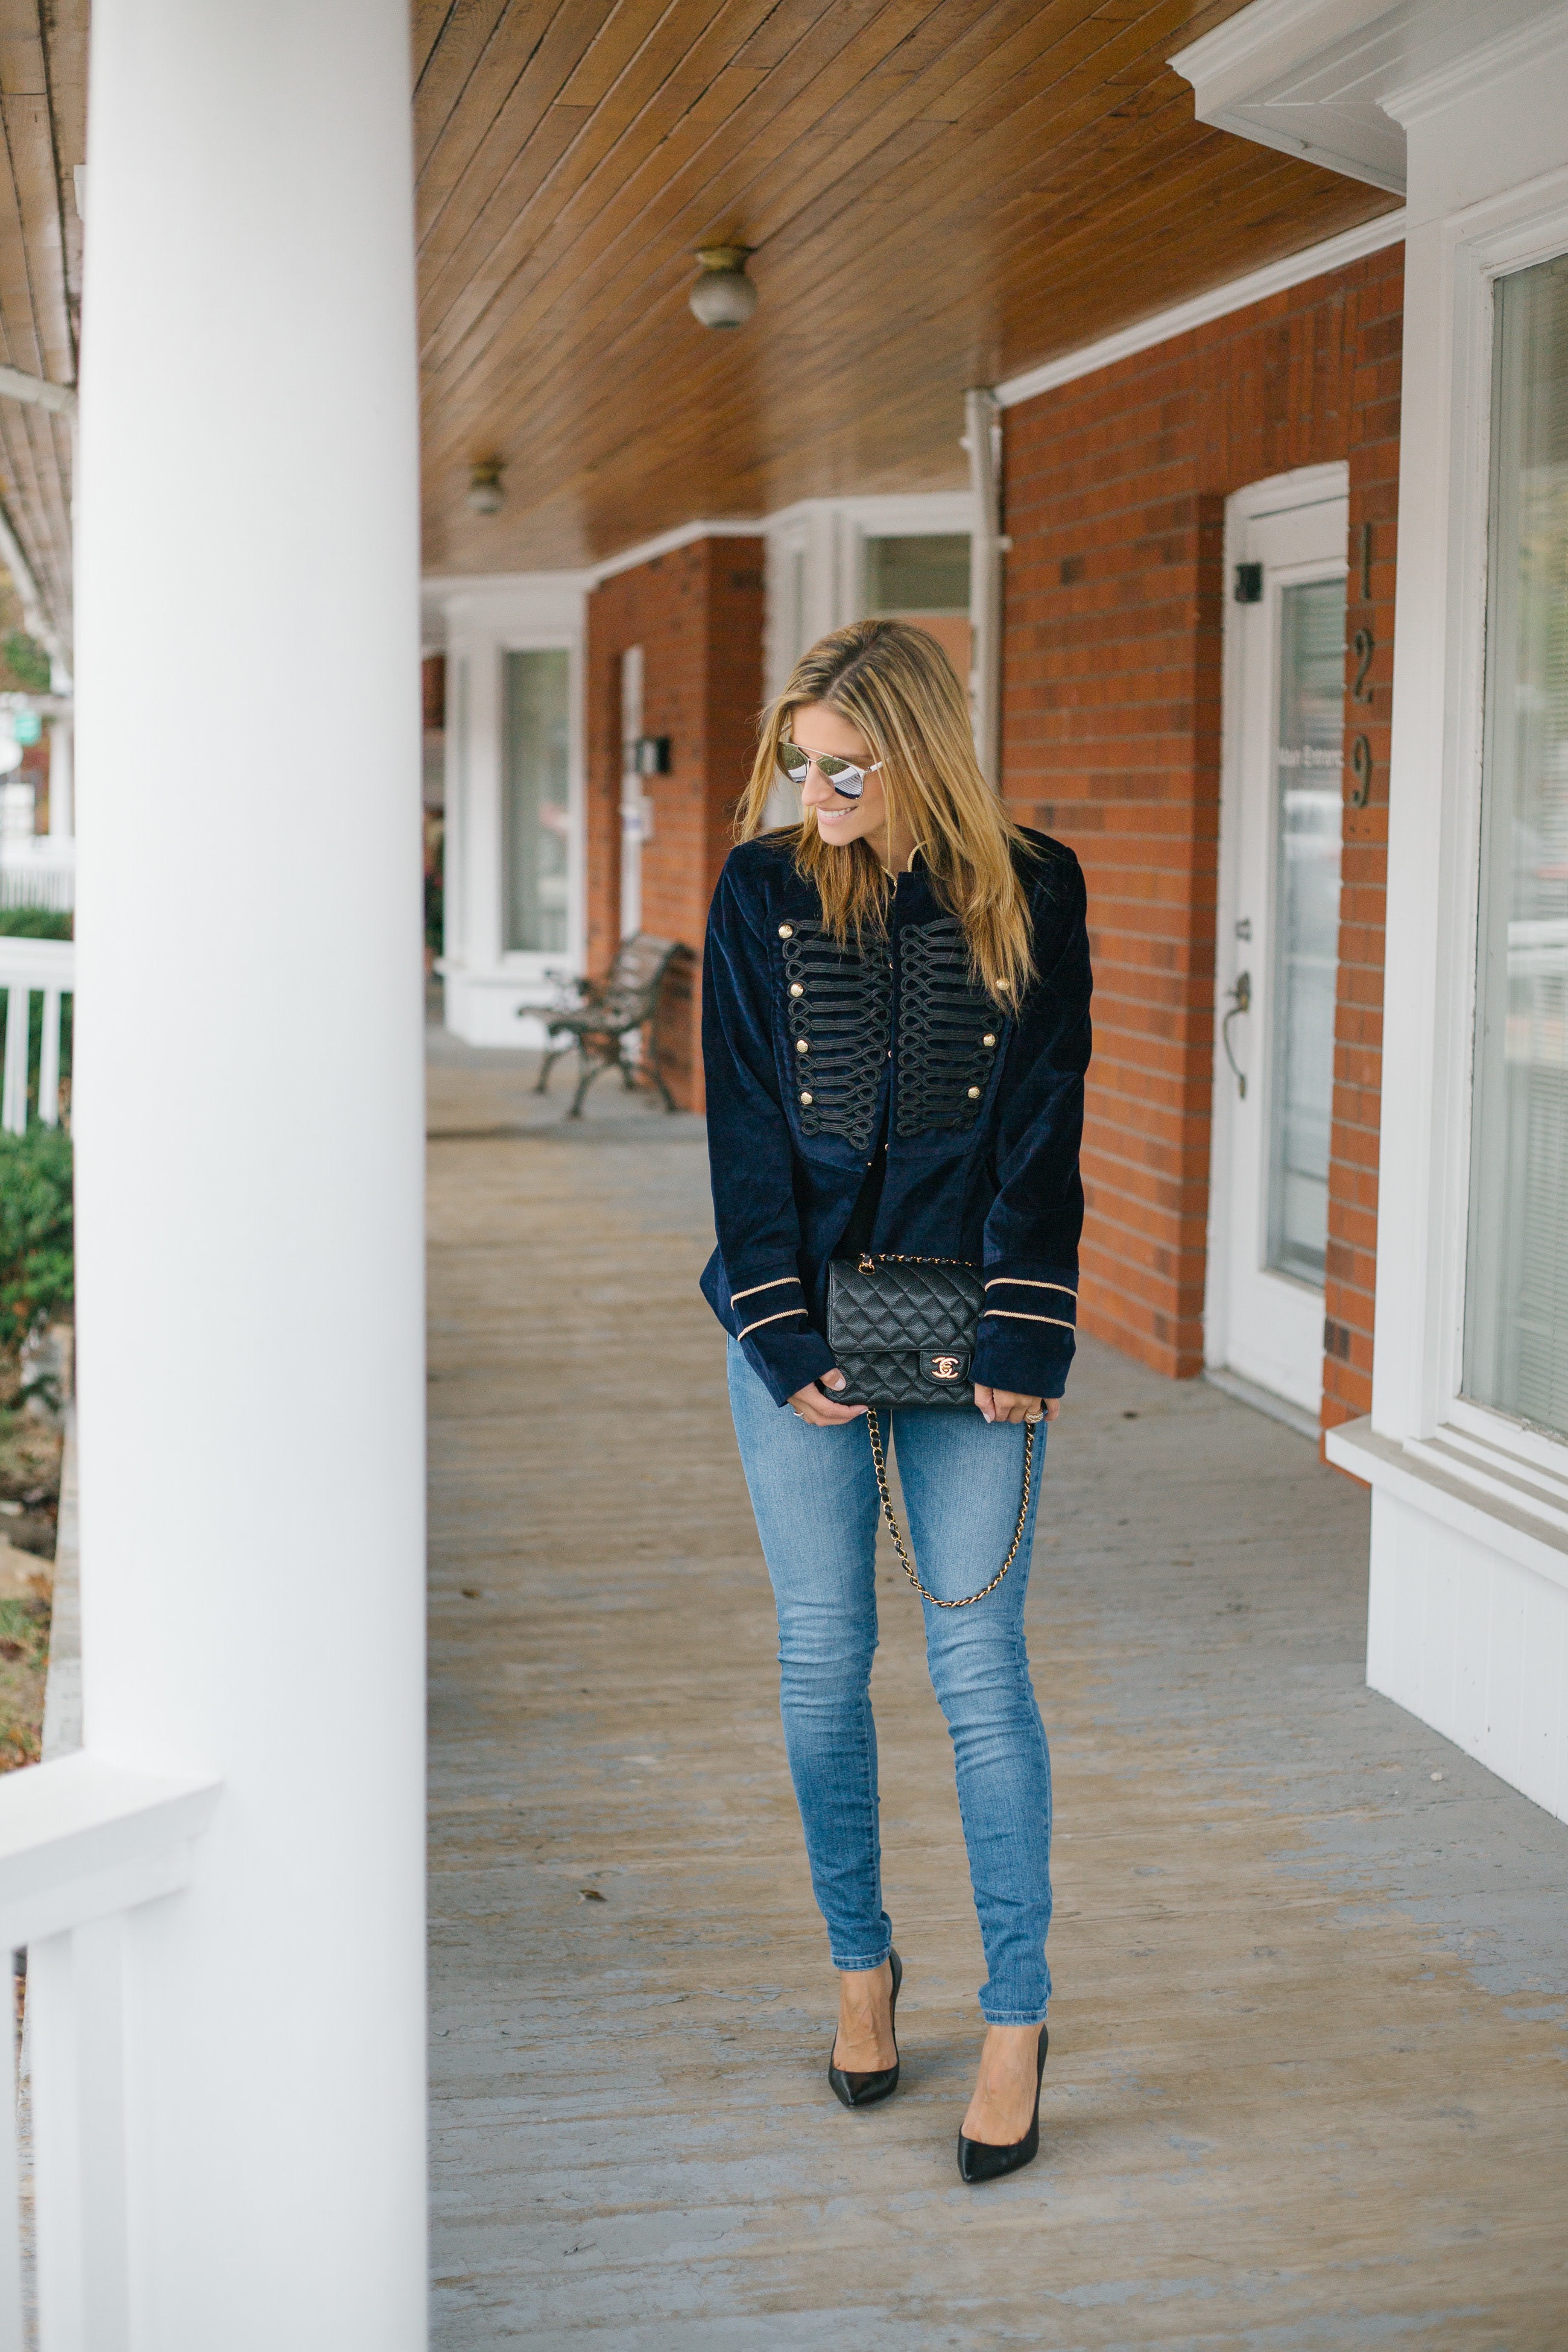 Fall weekend uniform with military jacket, jeans and heels